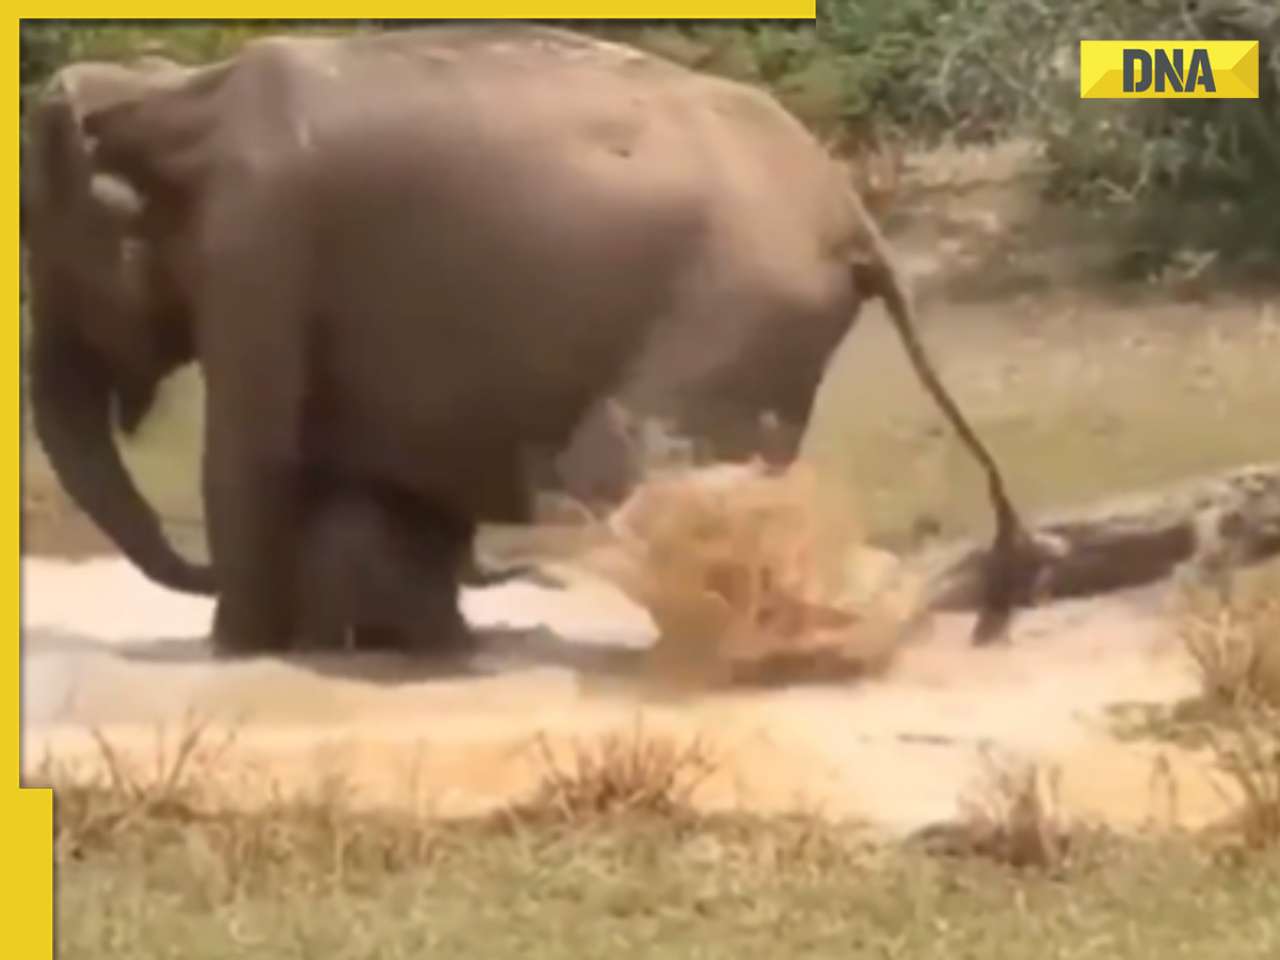 Terrifying encounter: Mama elephant battles crocodile to protect her calf, video goes viral